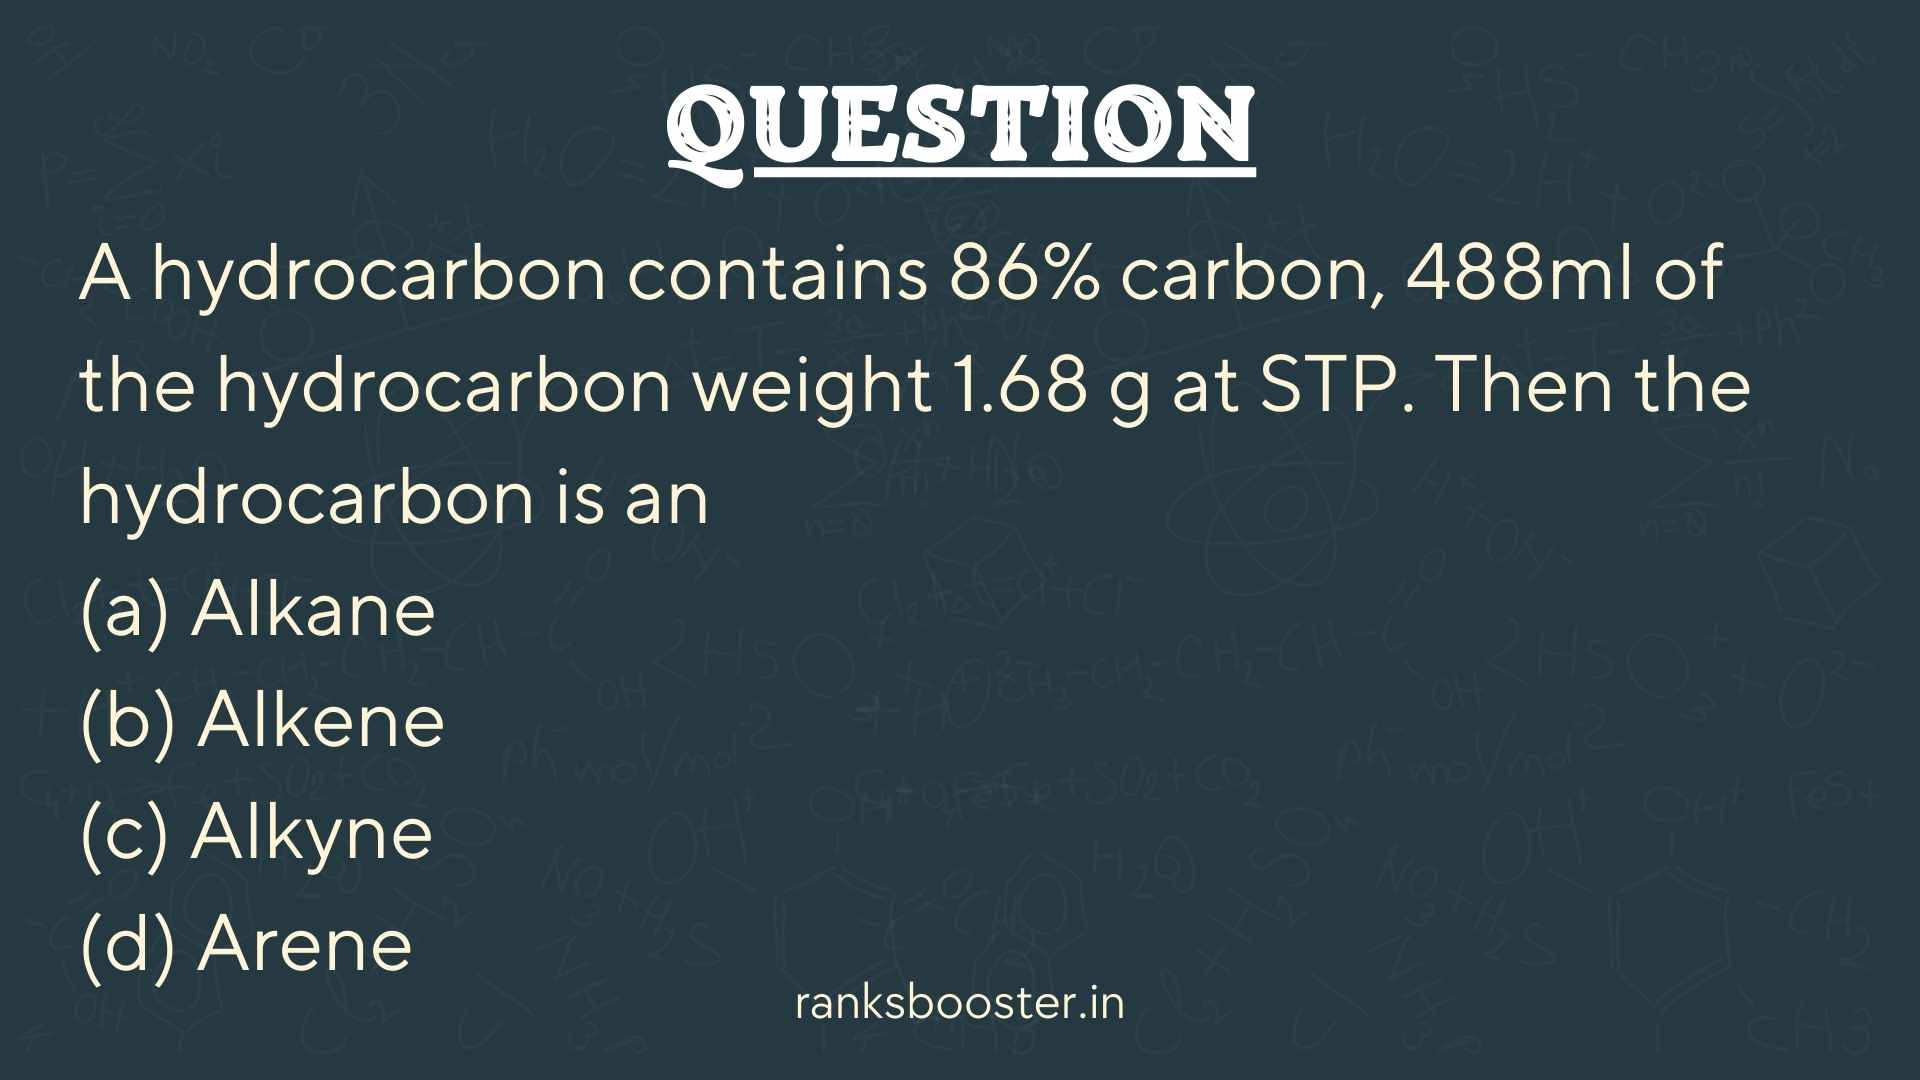 Question: A hydrocarbon contains 86% carbon, 488ml of the hydrocarbon weight 1.68 g at STP. Then the hydrocarbon is an (a) Alkane (b) Alkene (c) Alkyne (d) Arene